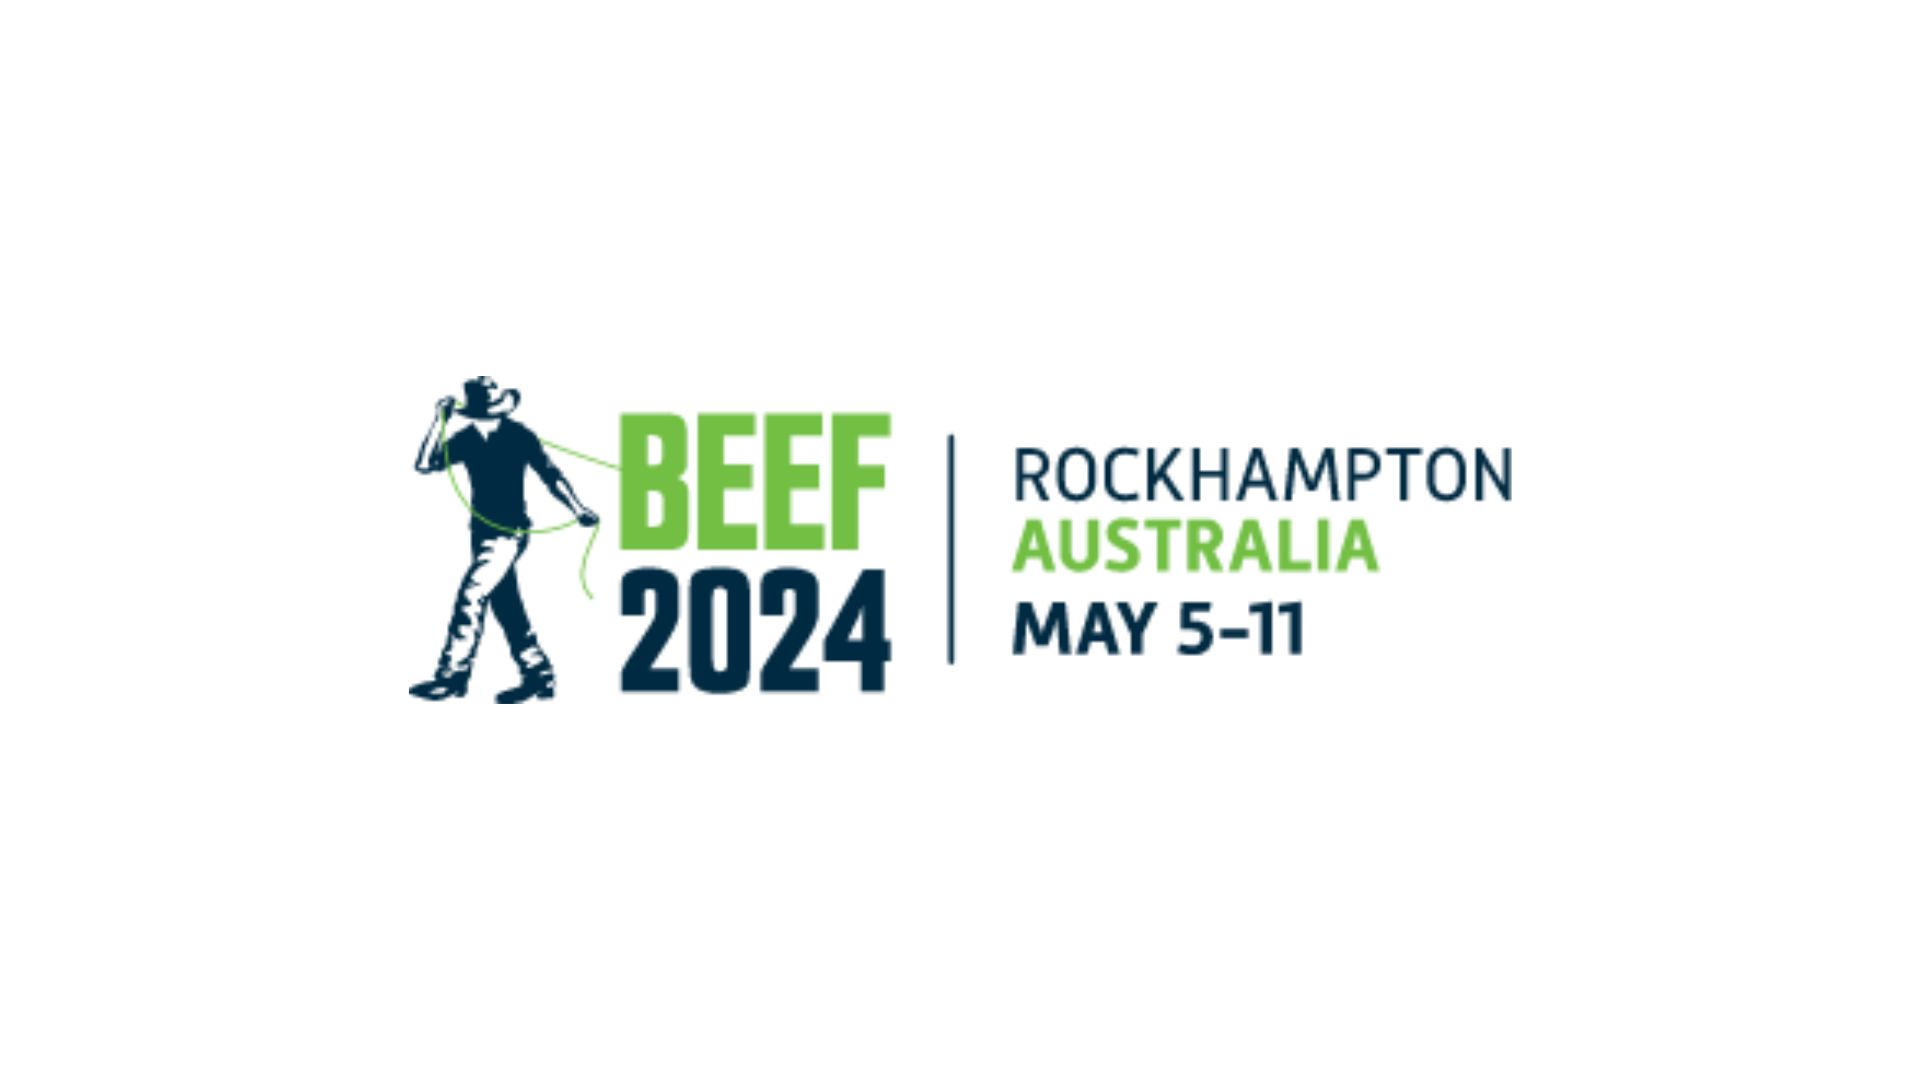 Queensland Government unveils 2.25M investment into Beef 2024 event